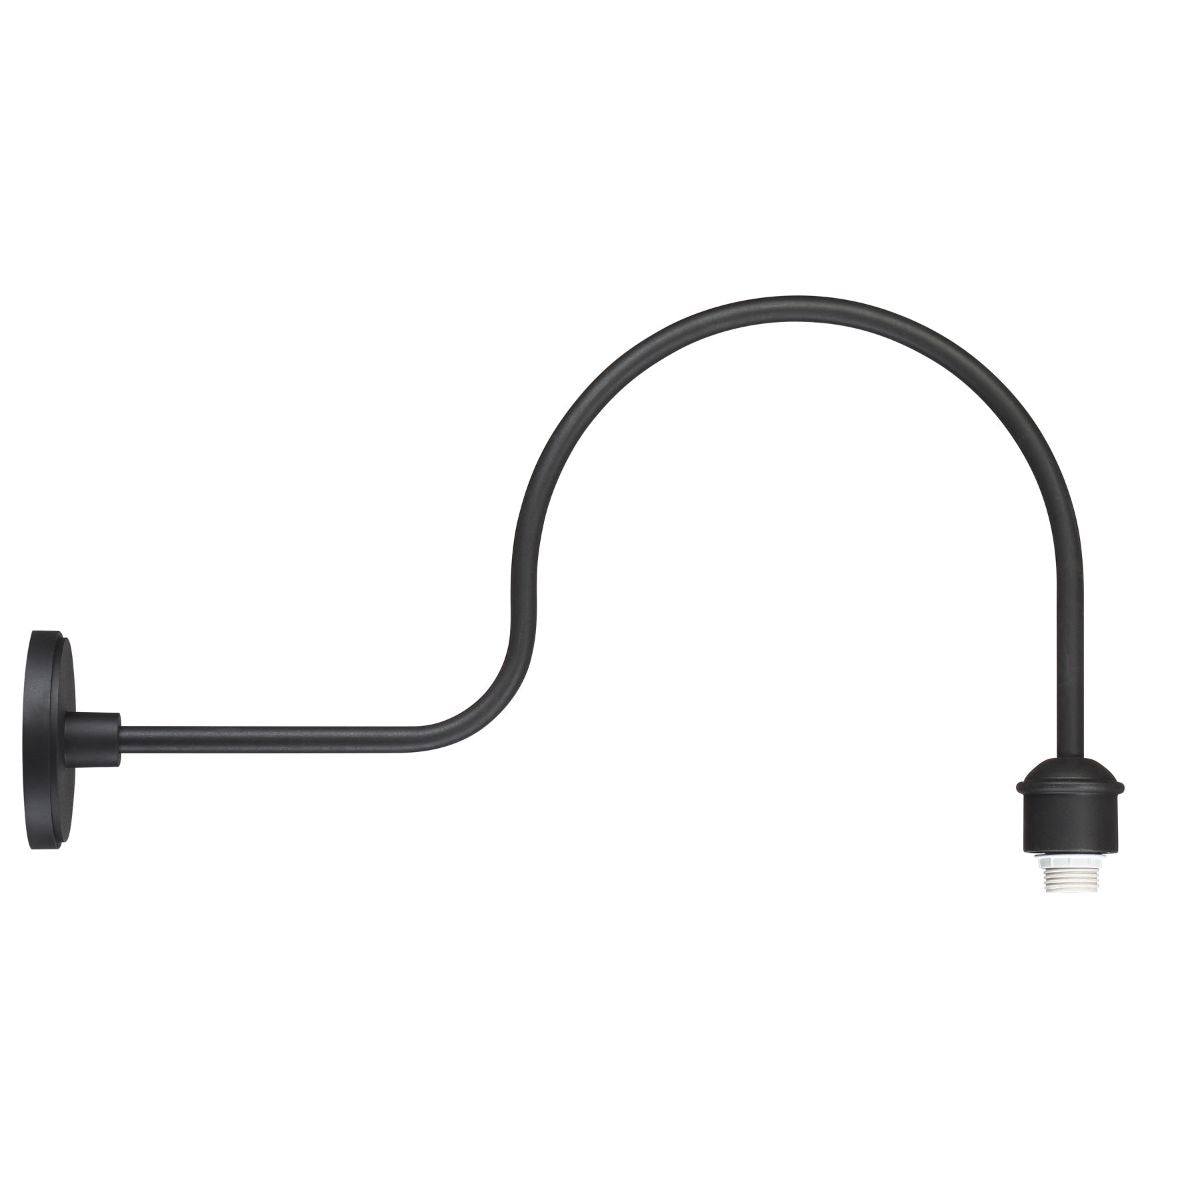 RLM Outdoor Wall Mount 30 In. Full Curved Arm Black Finish